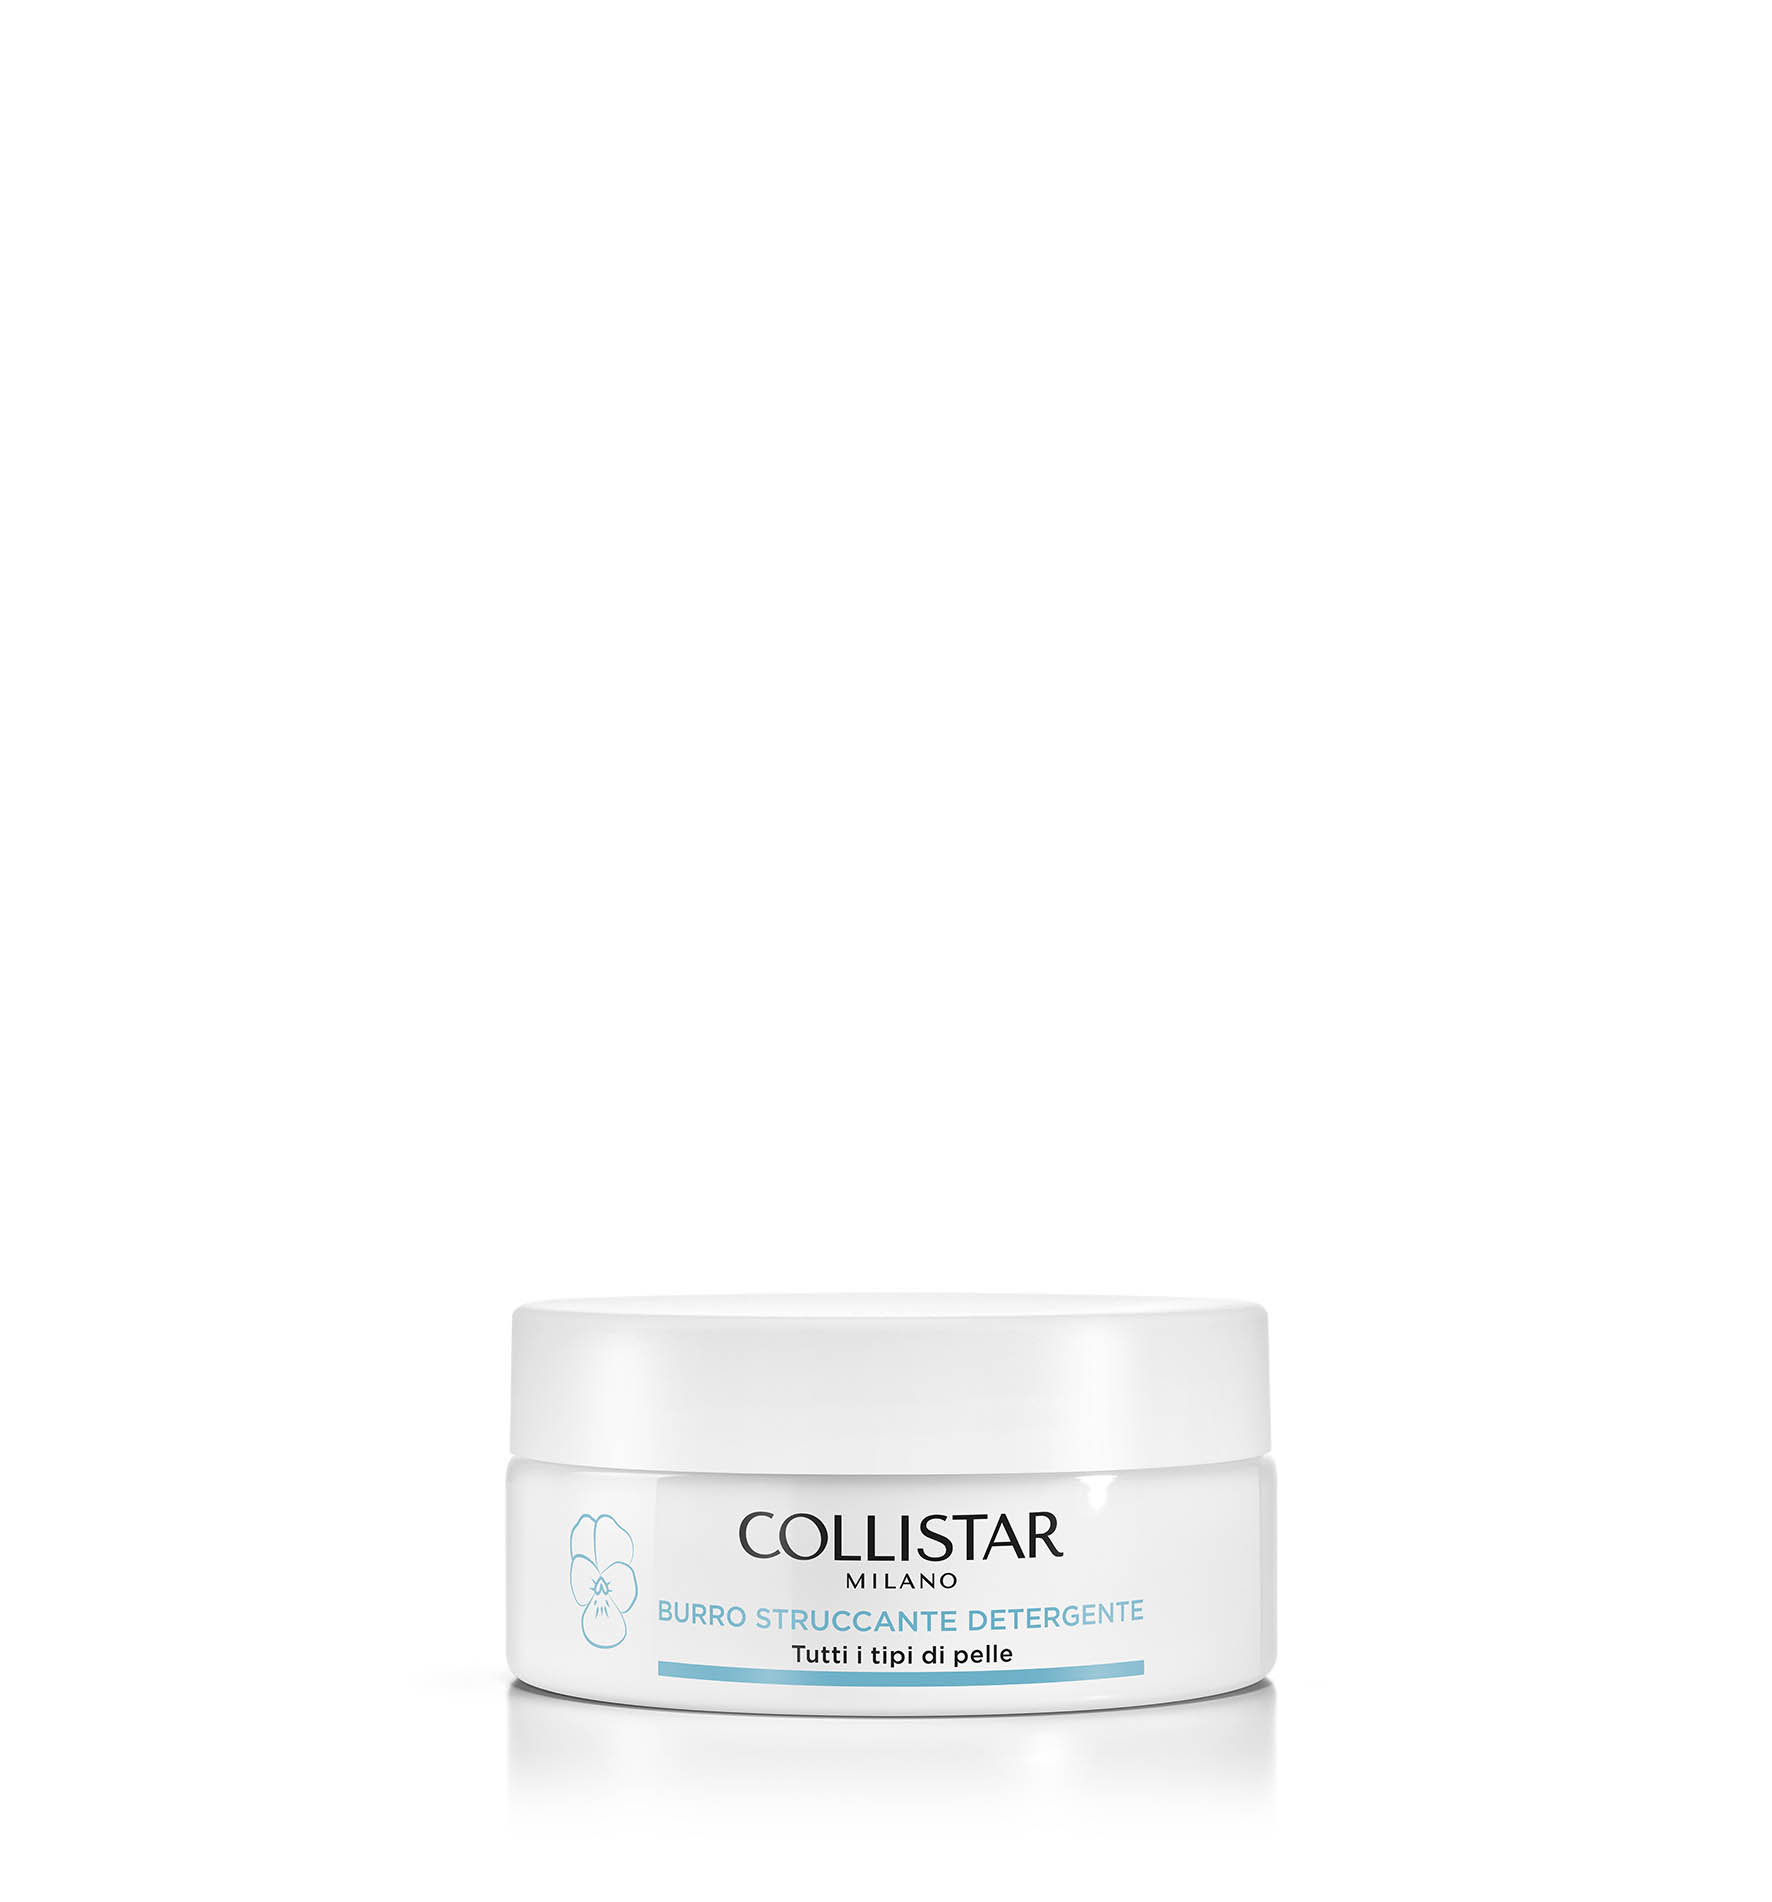 MAKE-UP REMOVING CLEANSING BALM - Cleansers | Collistar - Shop Online Ufficiale